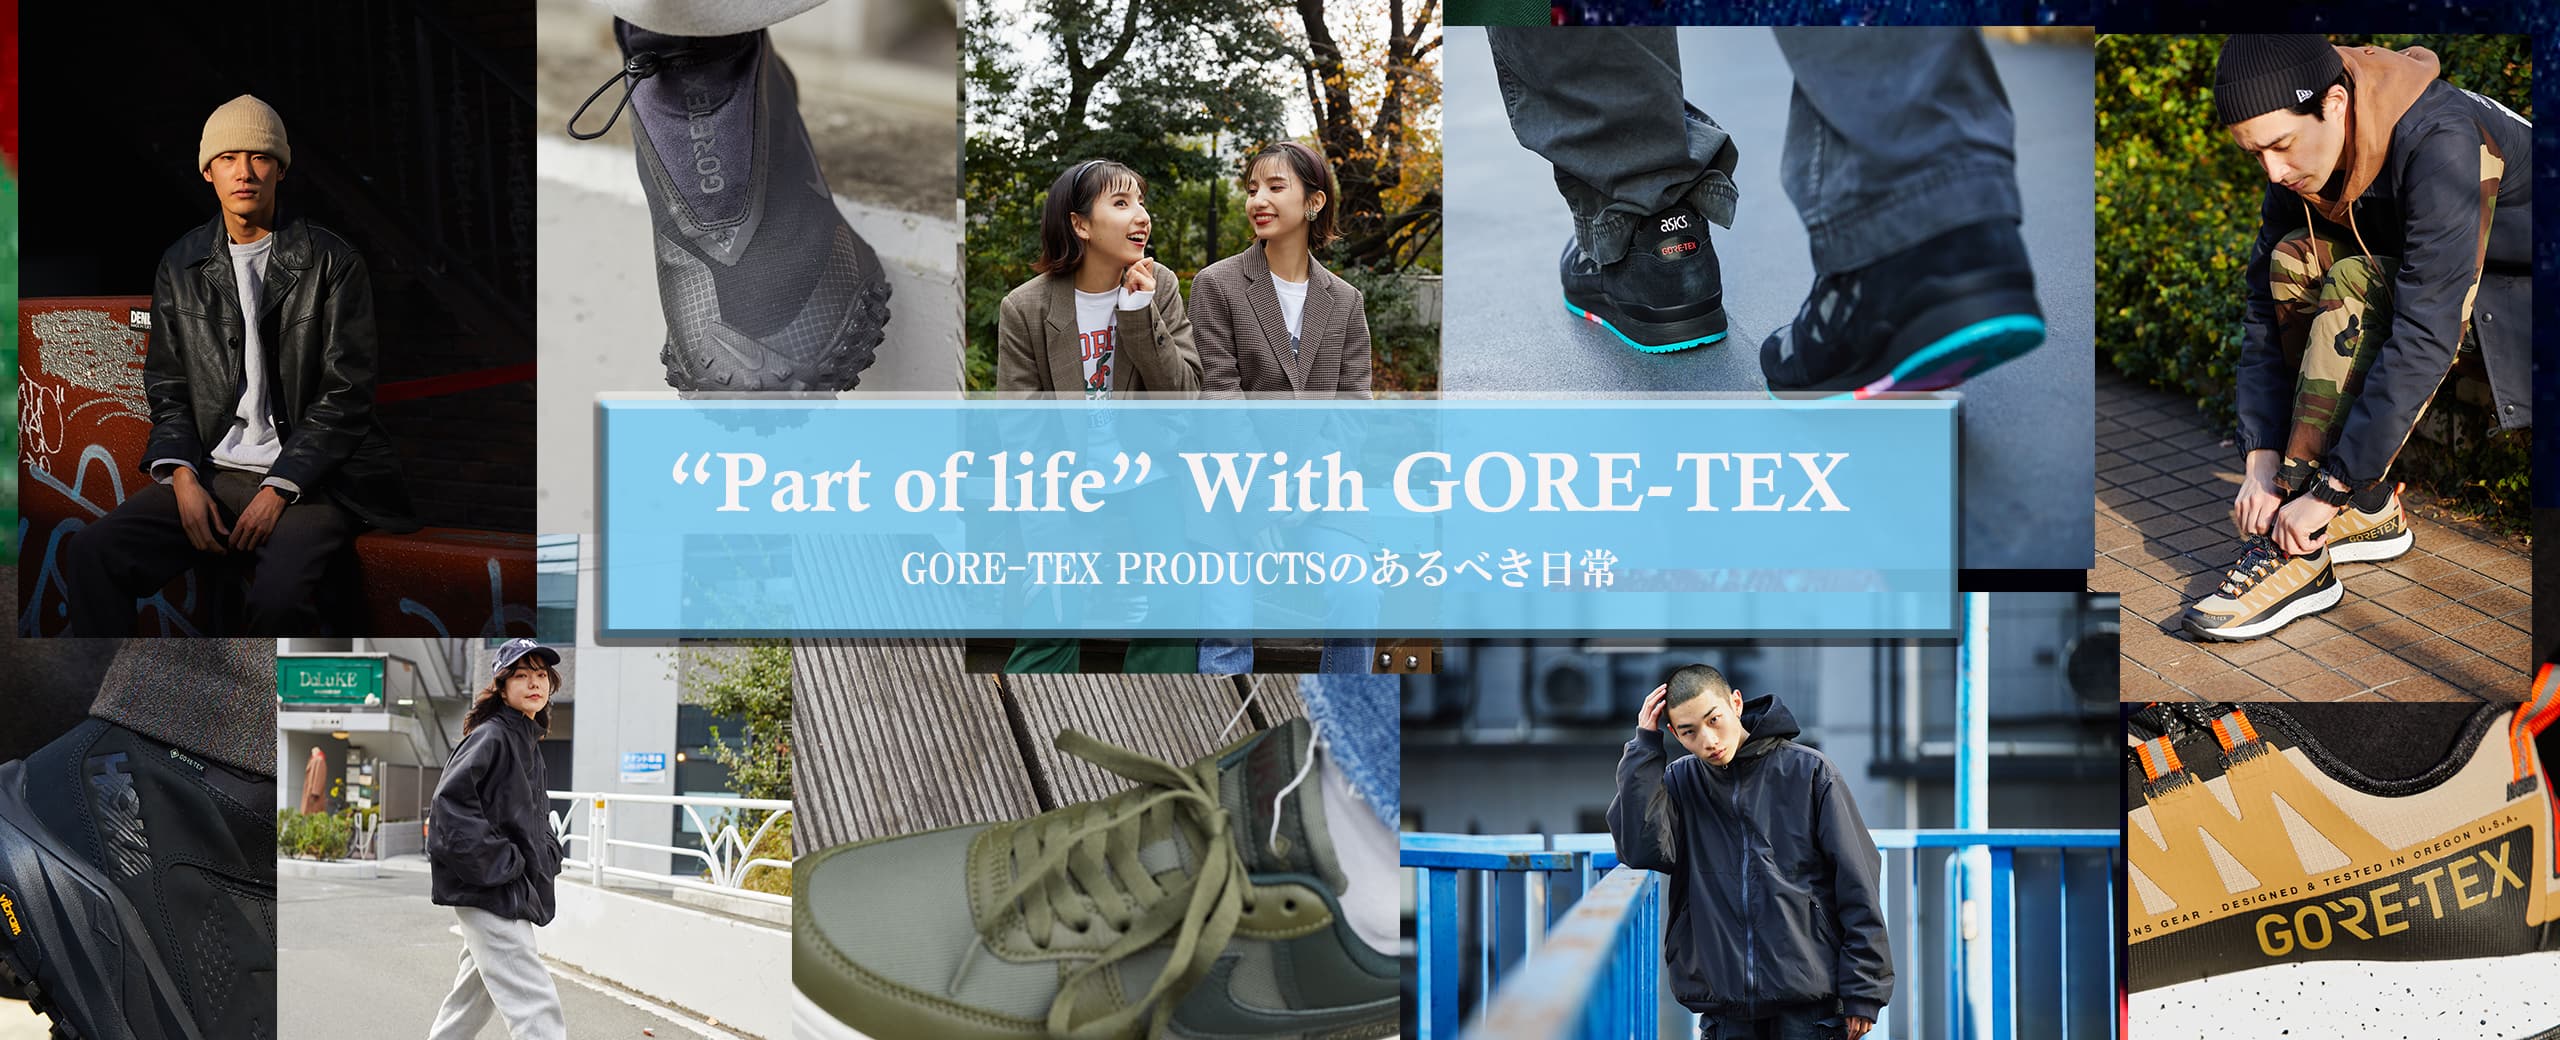 "“Part of life” with GORE-TEX"